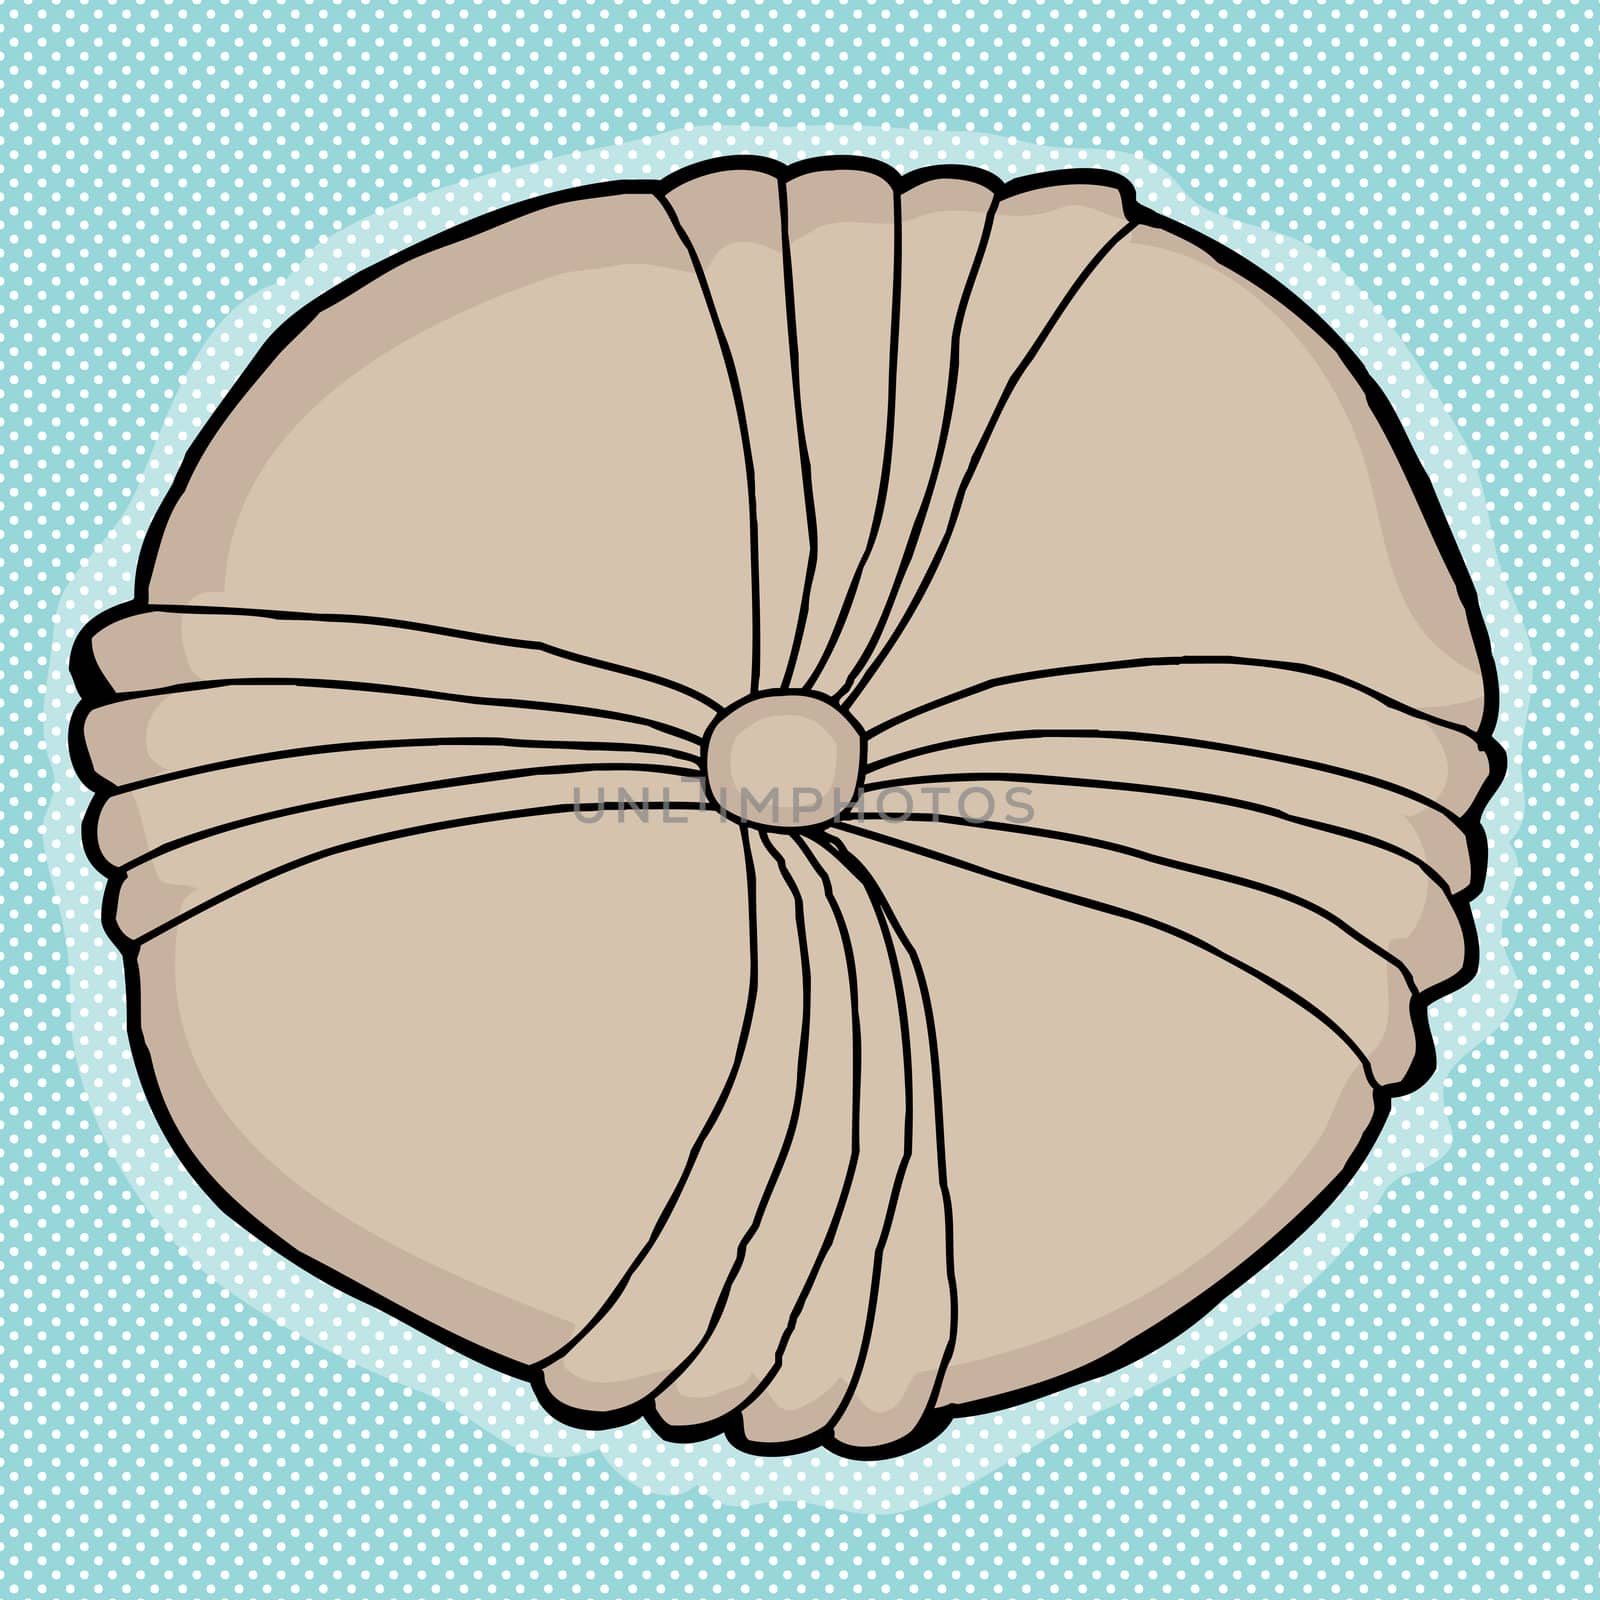 Round echinoderm fossil drawing blue white background